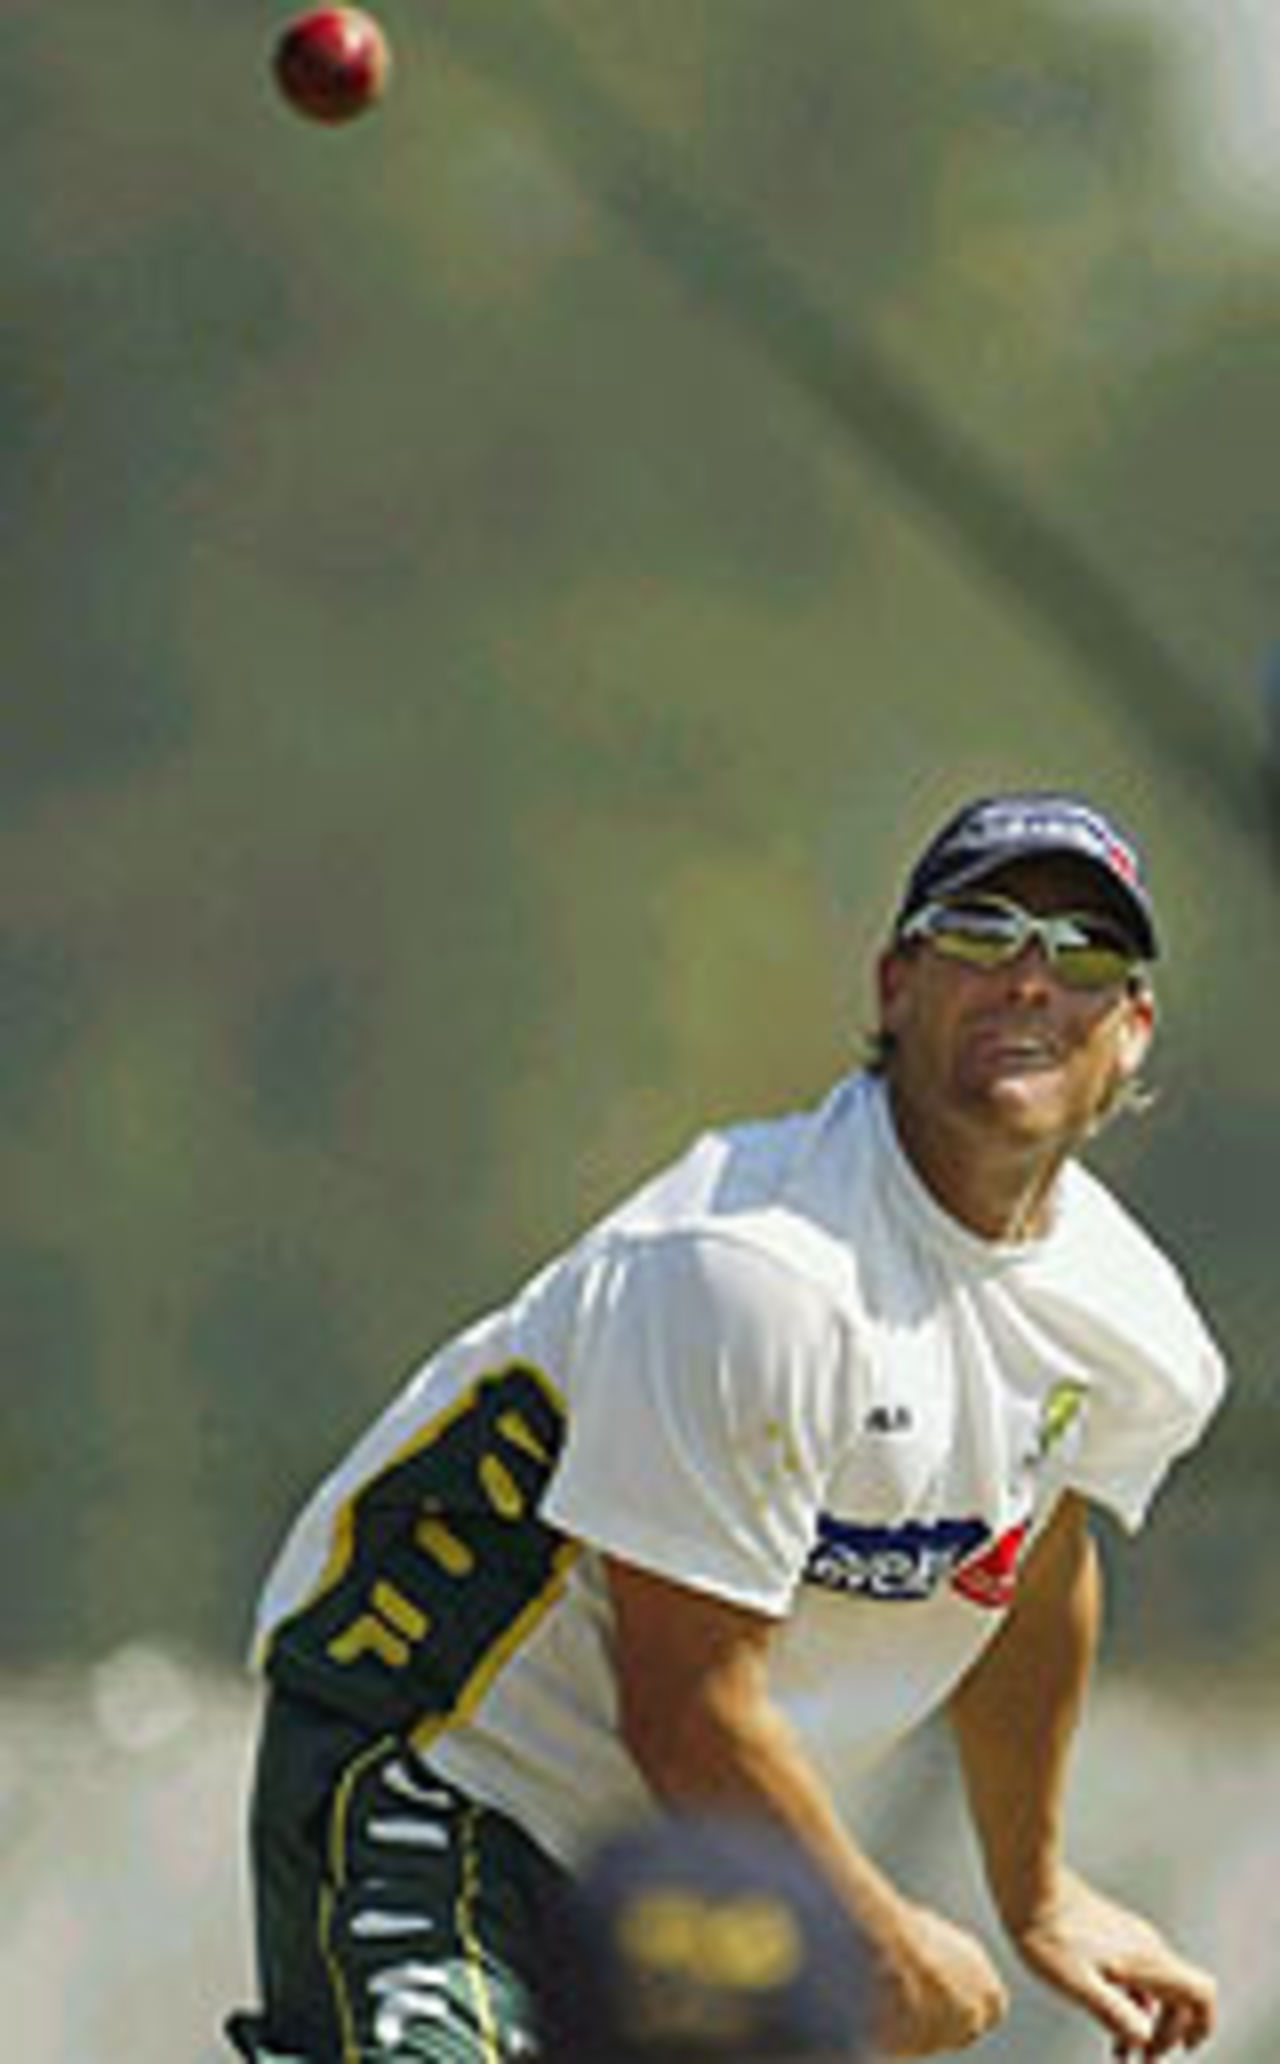 Shane Warne bowls in the nets at Kandy, March 14, 2004